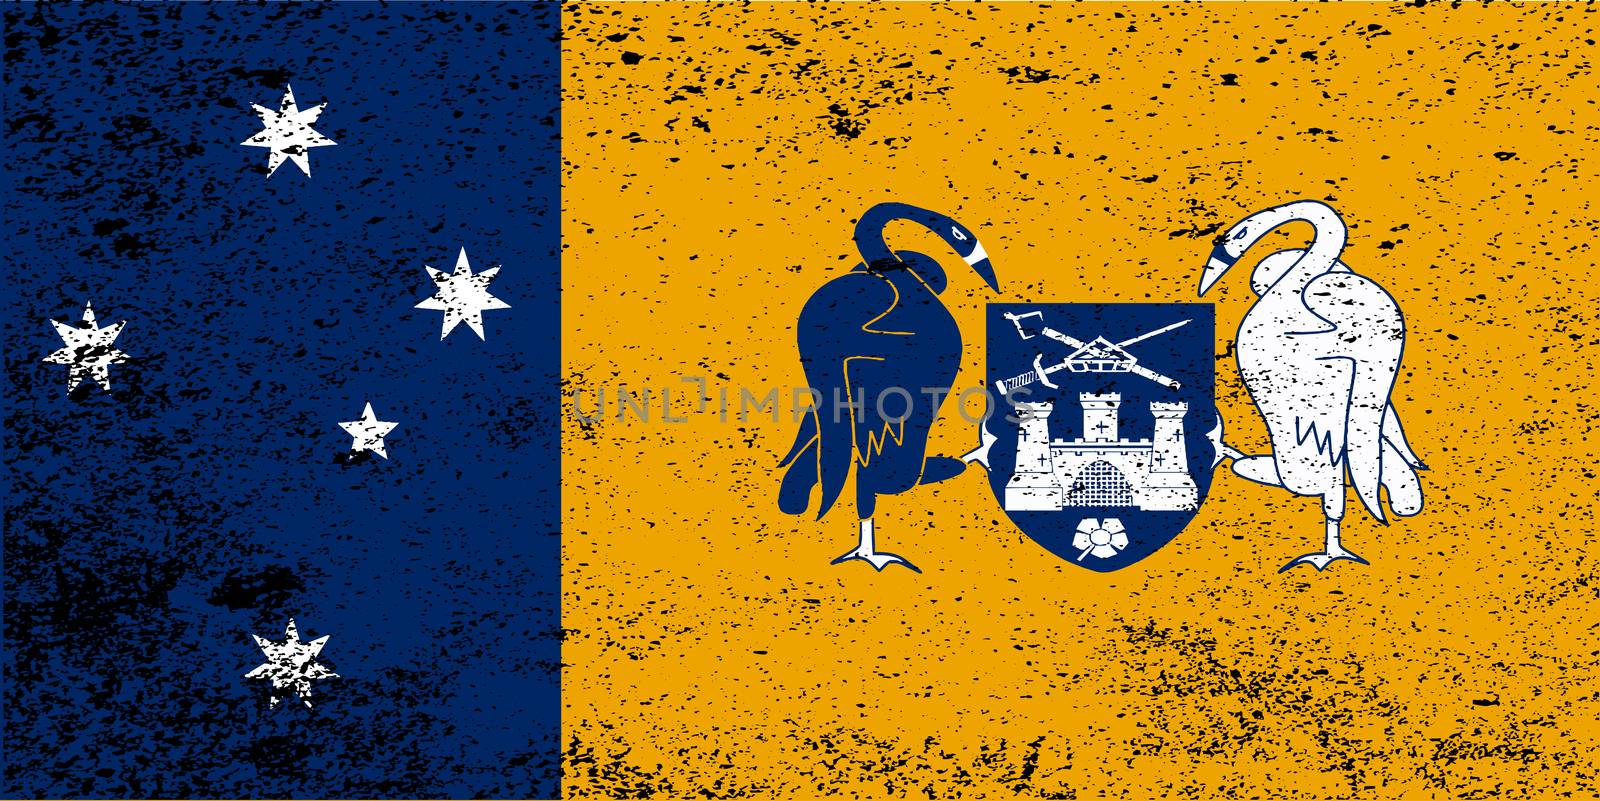 The flag of the Australian Capital Territory with grunge